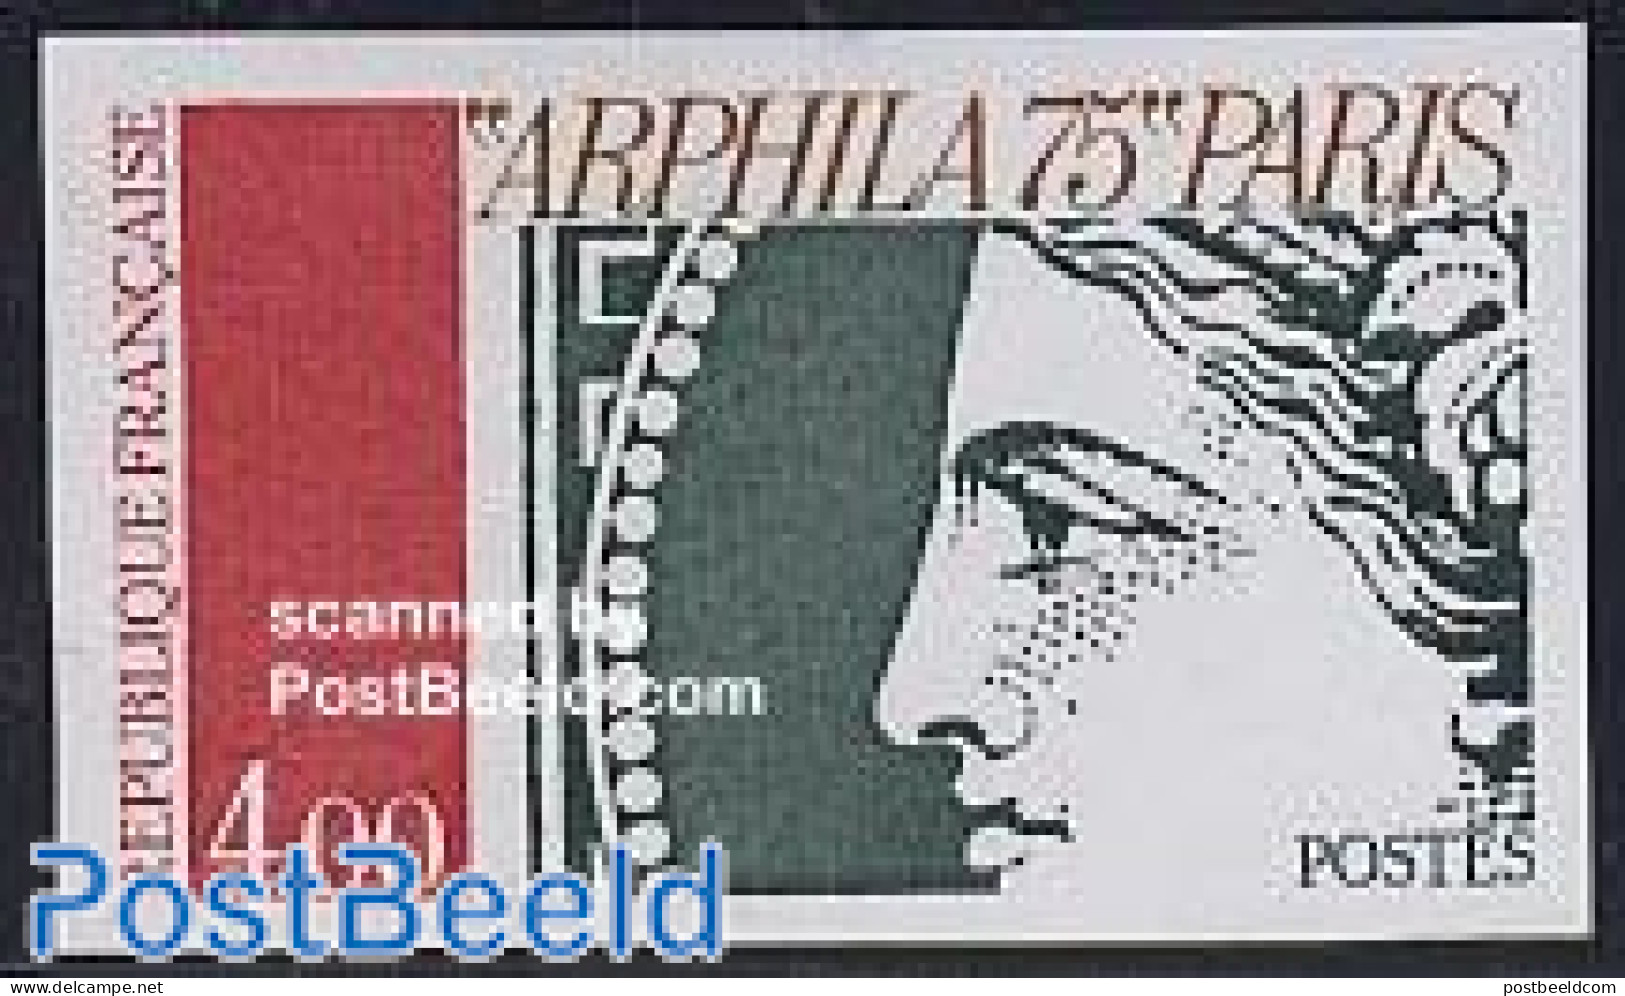 France 1975 Arphila 1v Imperforated, Mint NH, Stamps On Stamps - Nuovi